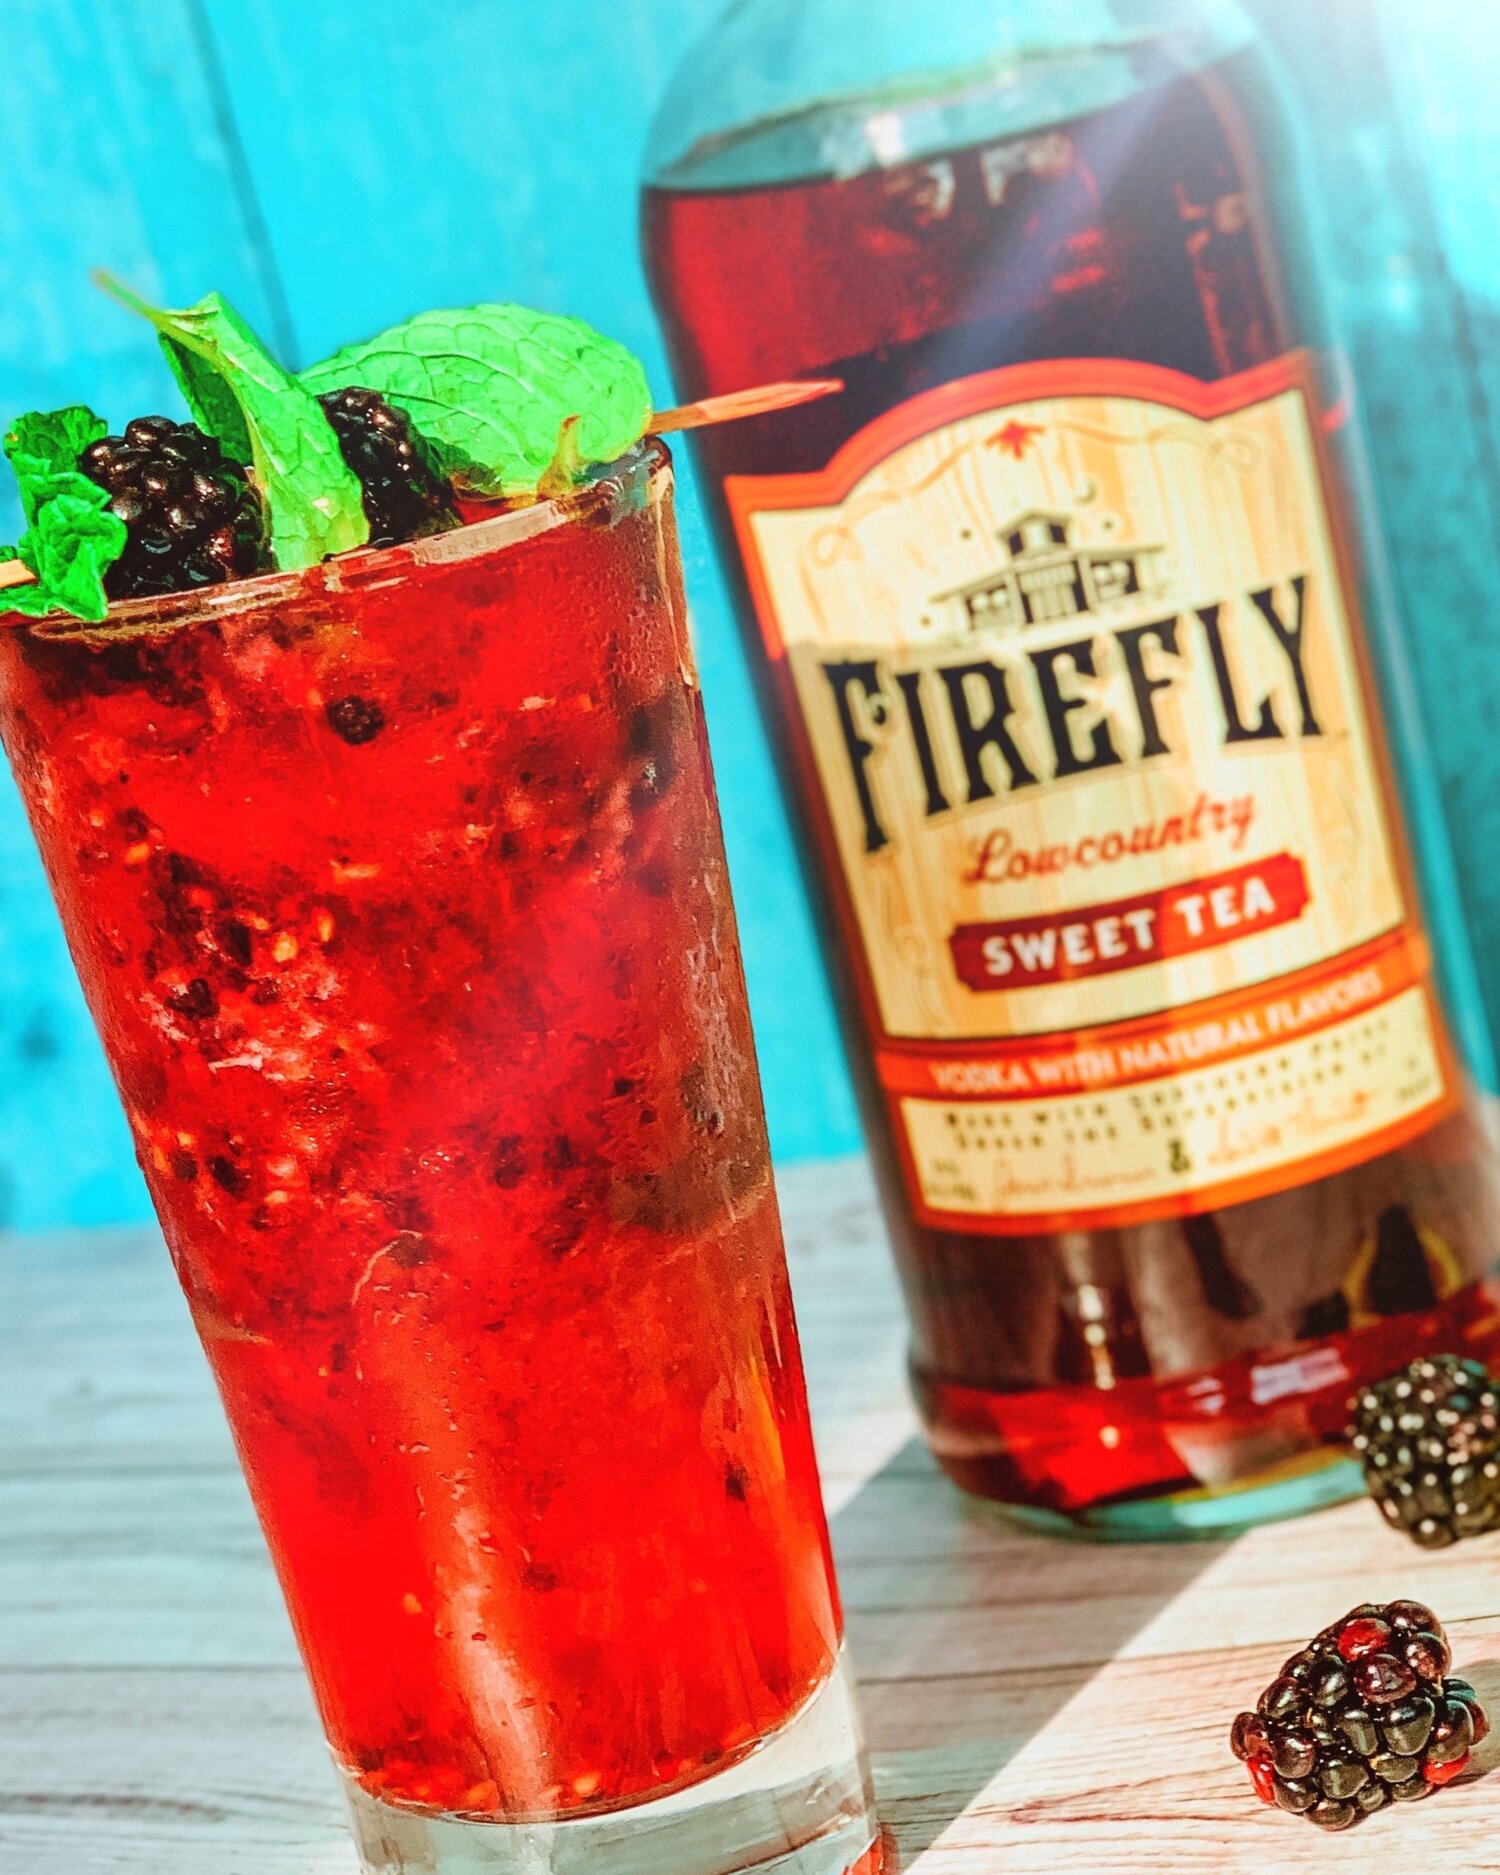 Firefly Sweet Tea Vodka Cocktail Recipes You Will Love The Boozy Mermaid Cocktail Co